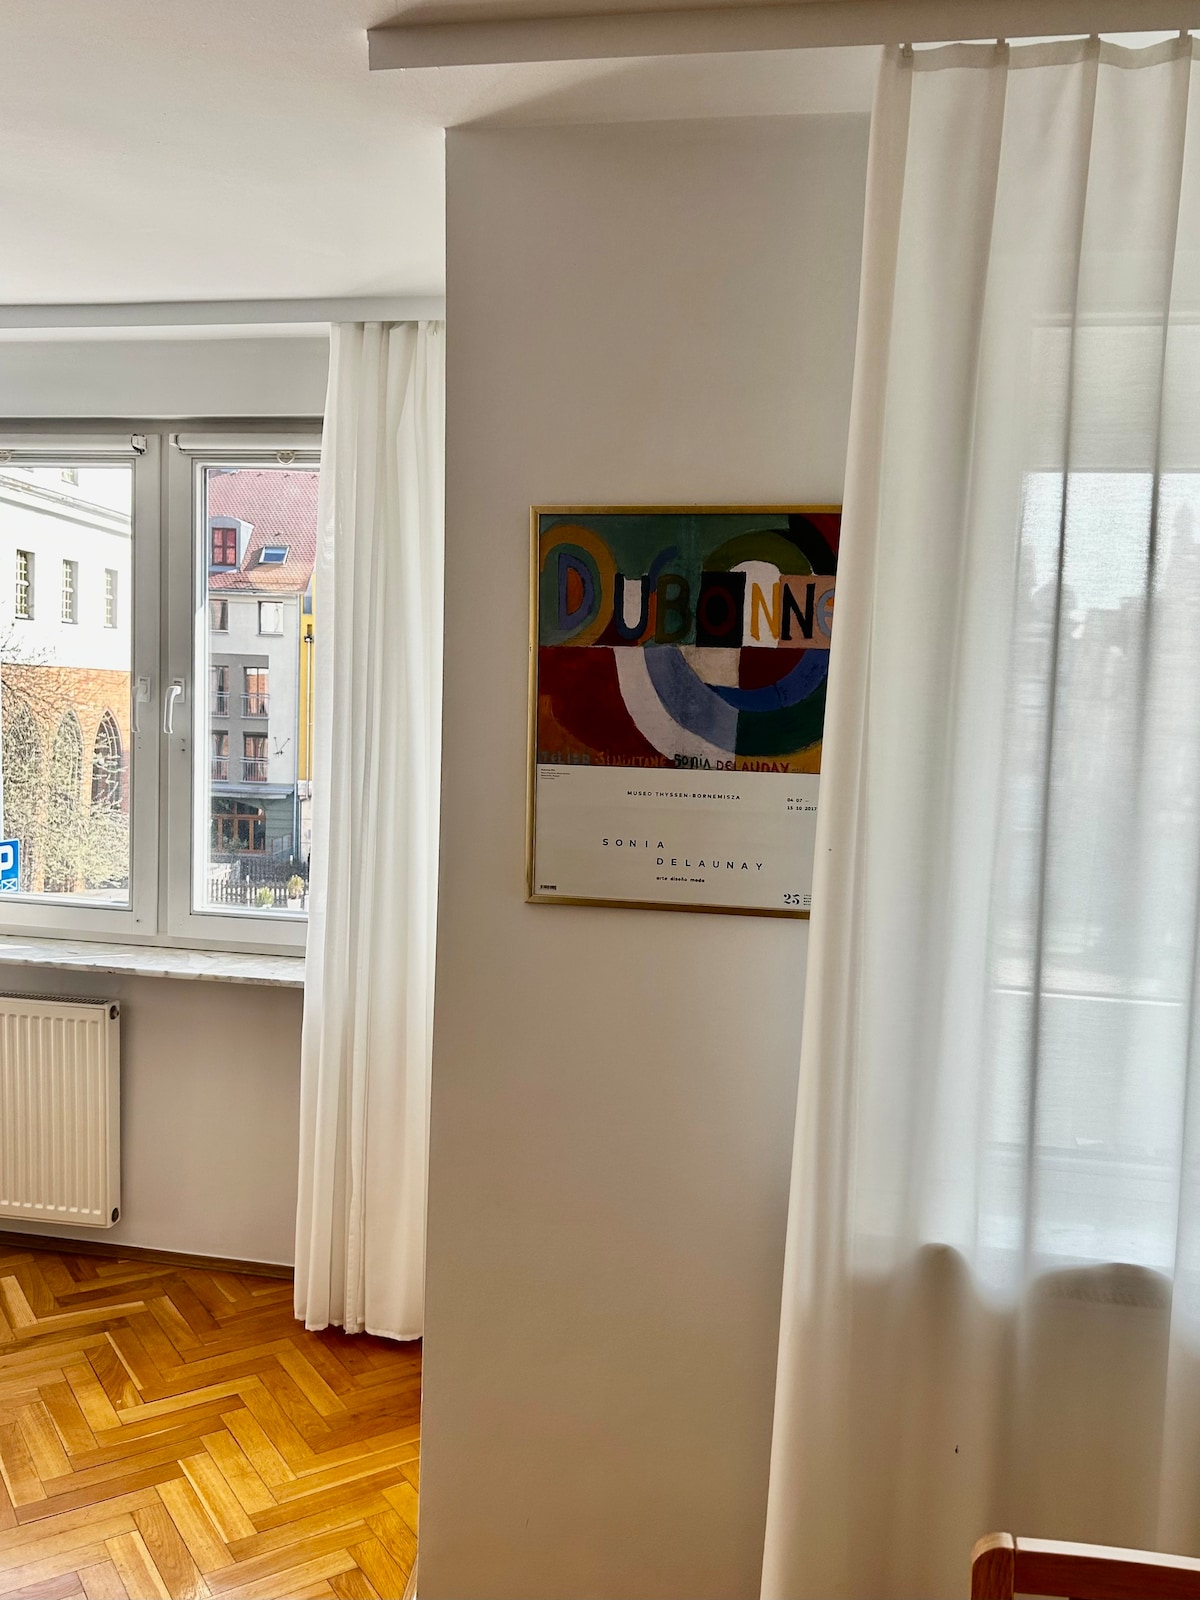 Sienny Market 2 bedroom Old Town by Stayly